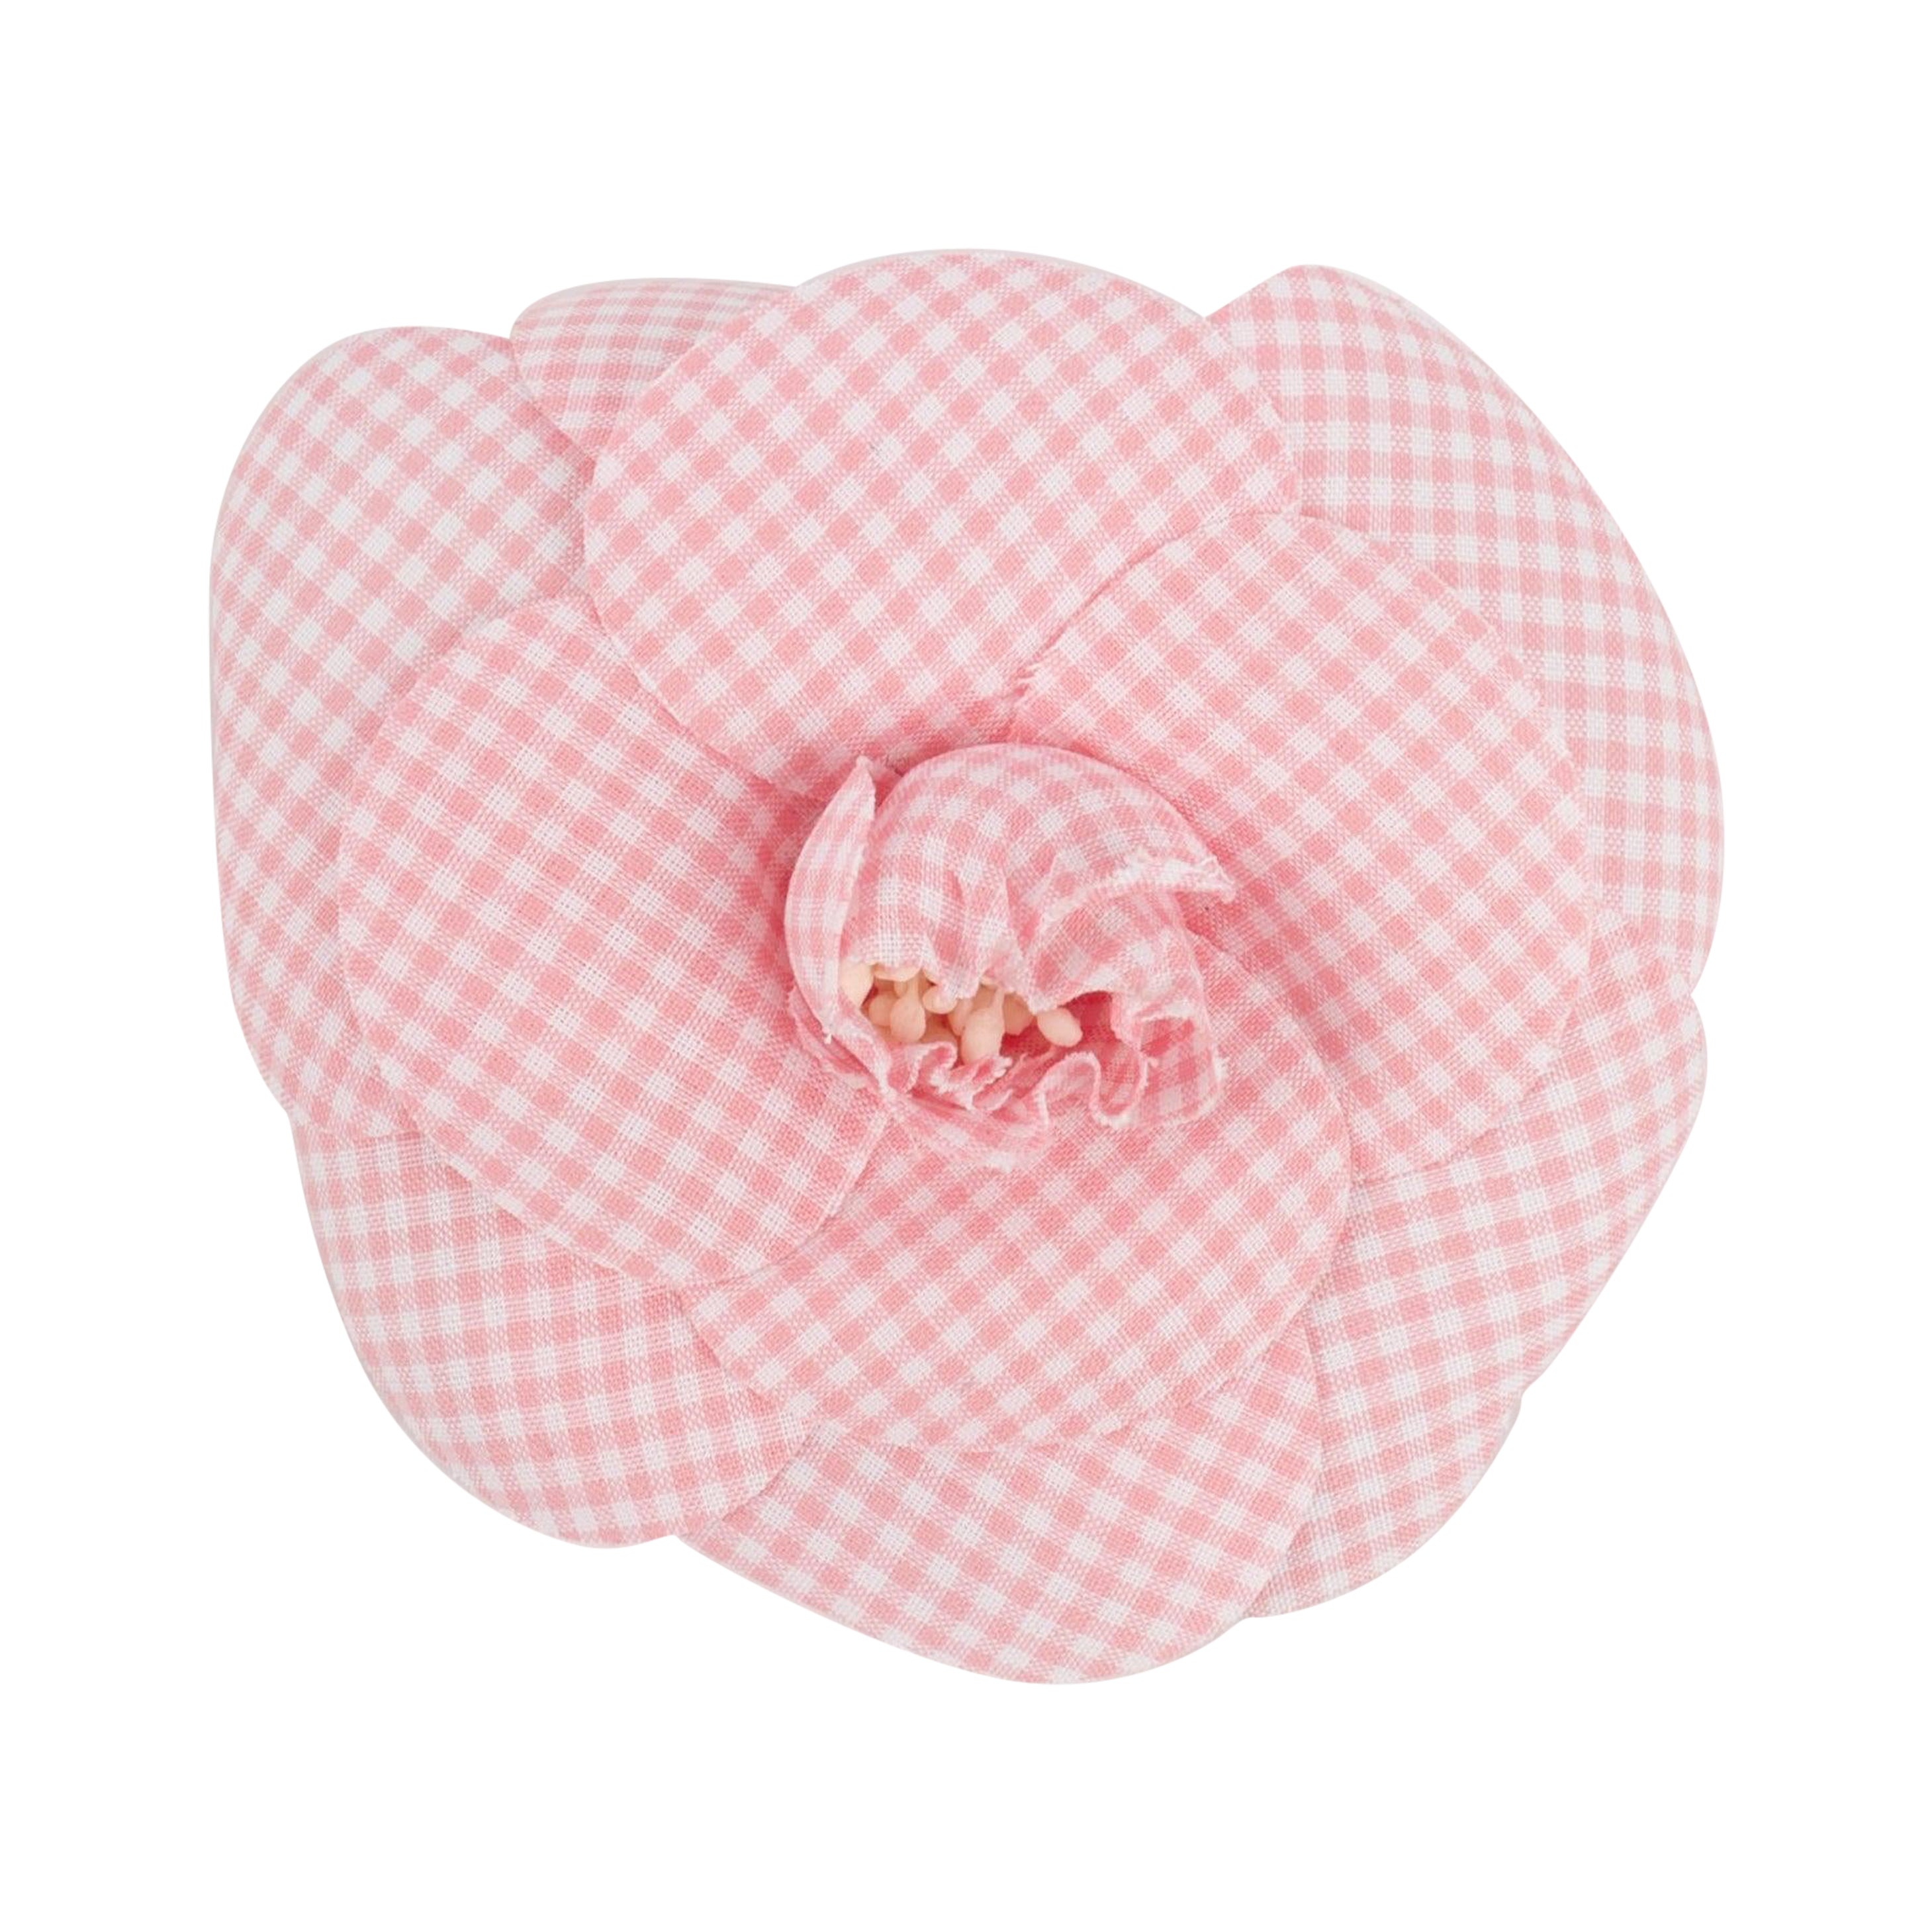 Chanel Camellia Brooch Made of Pink and White Gingham Fabric, 1990s For Sale